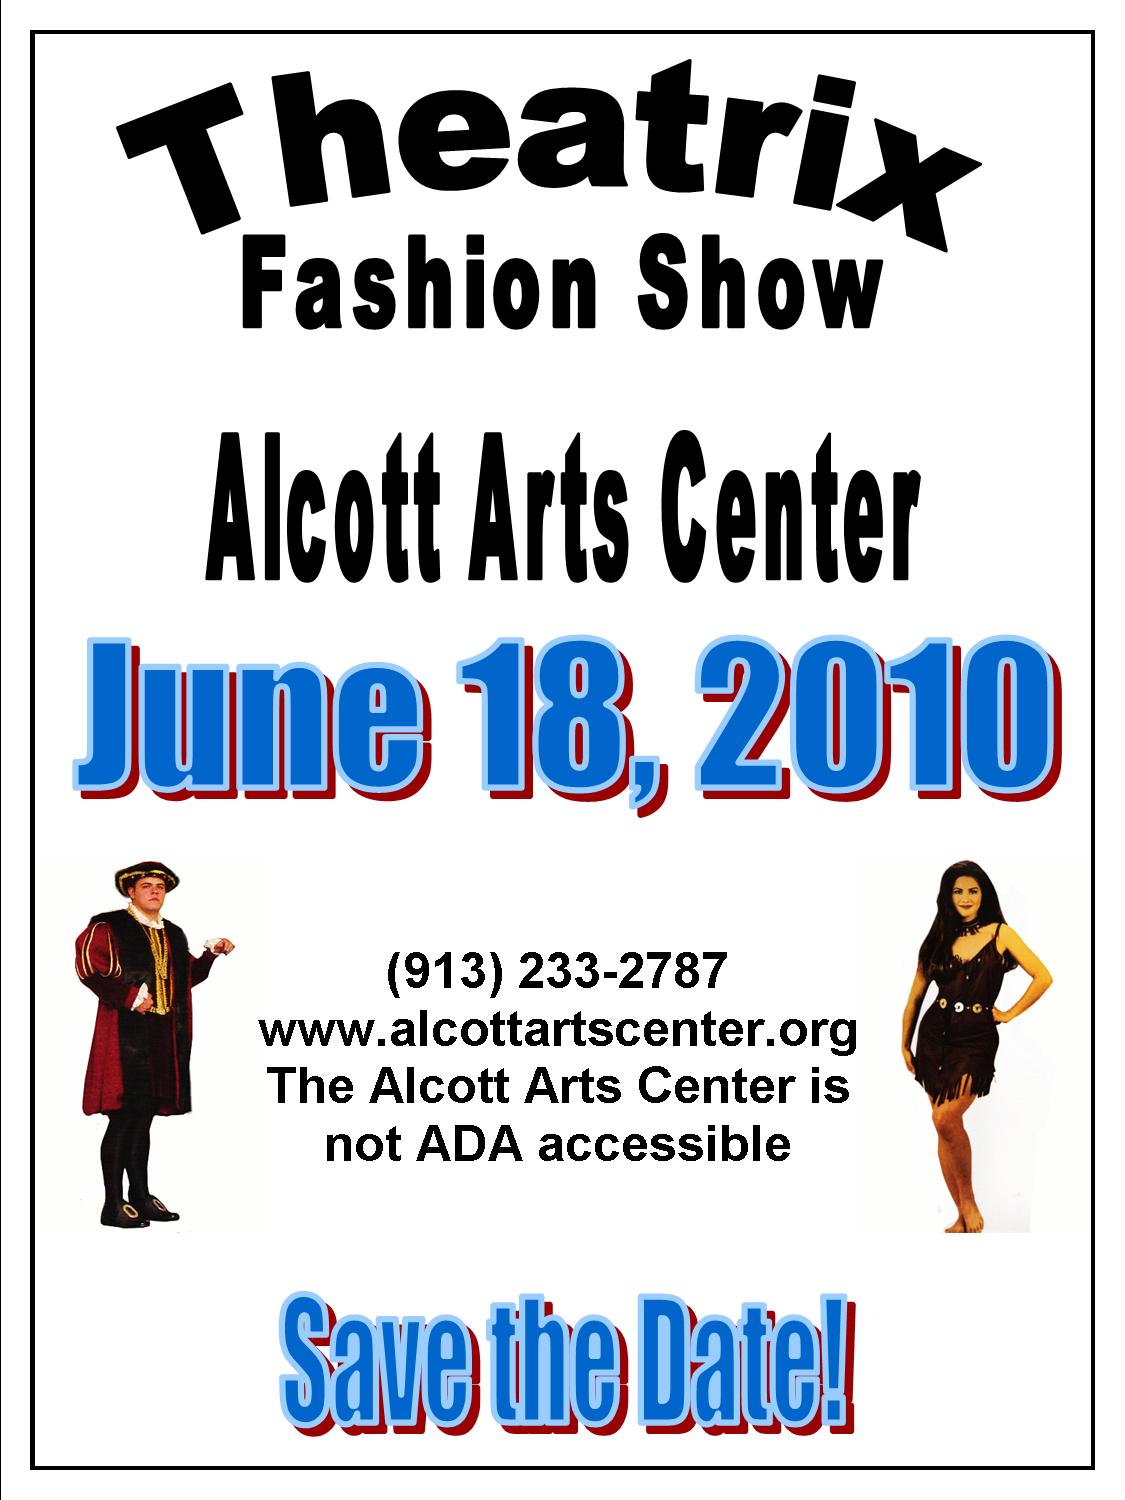 fashion show - save the date poster-1.jpg